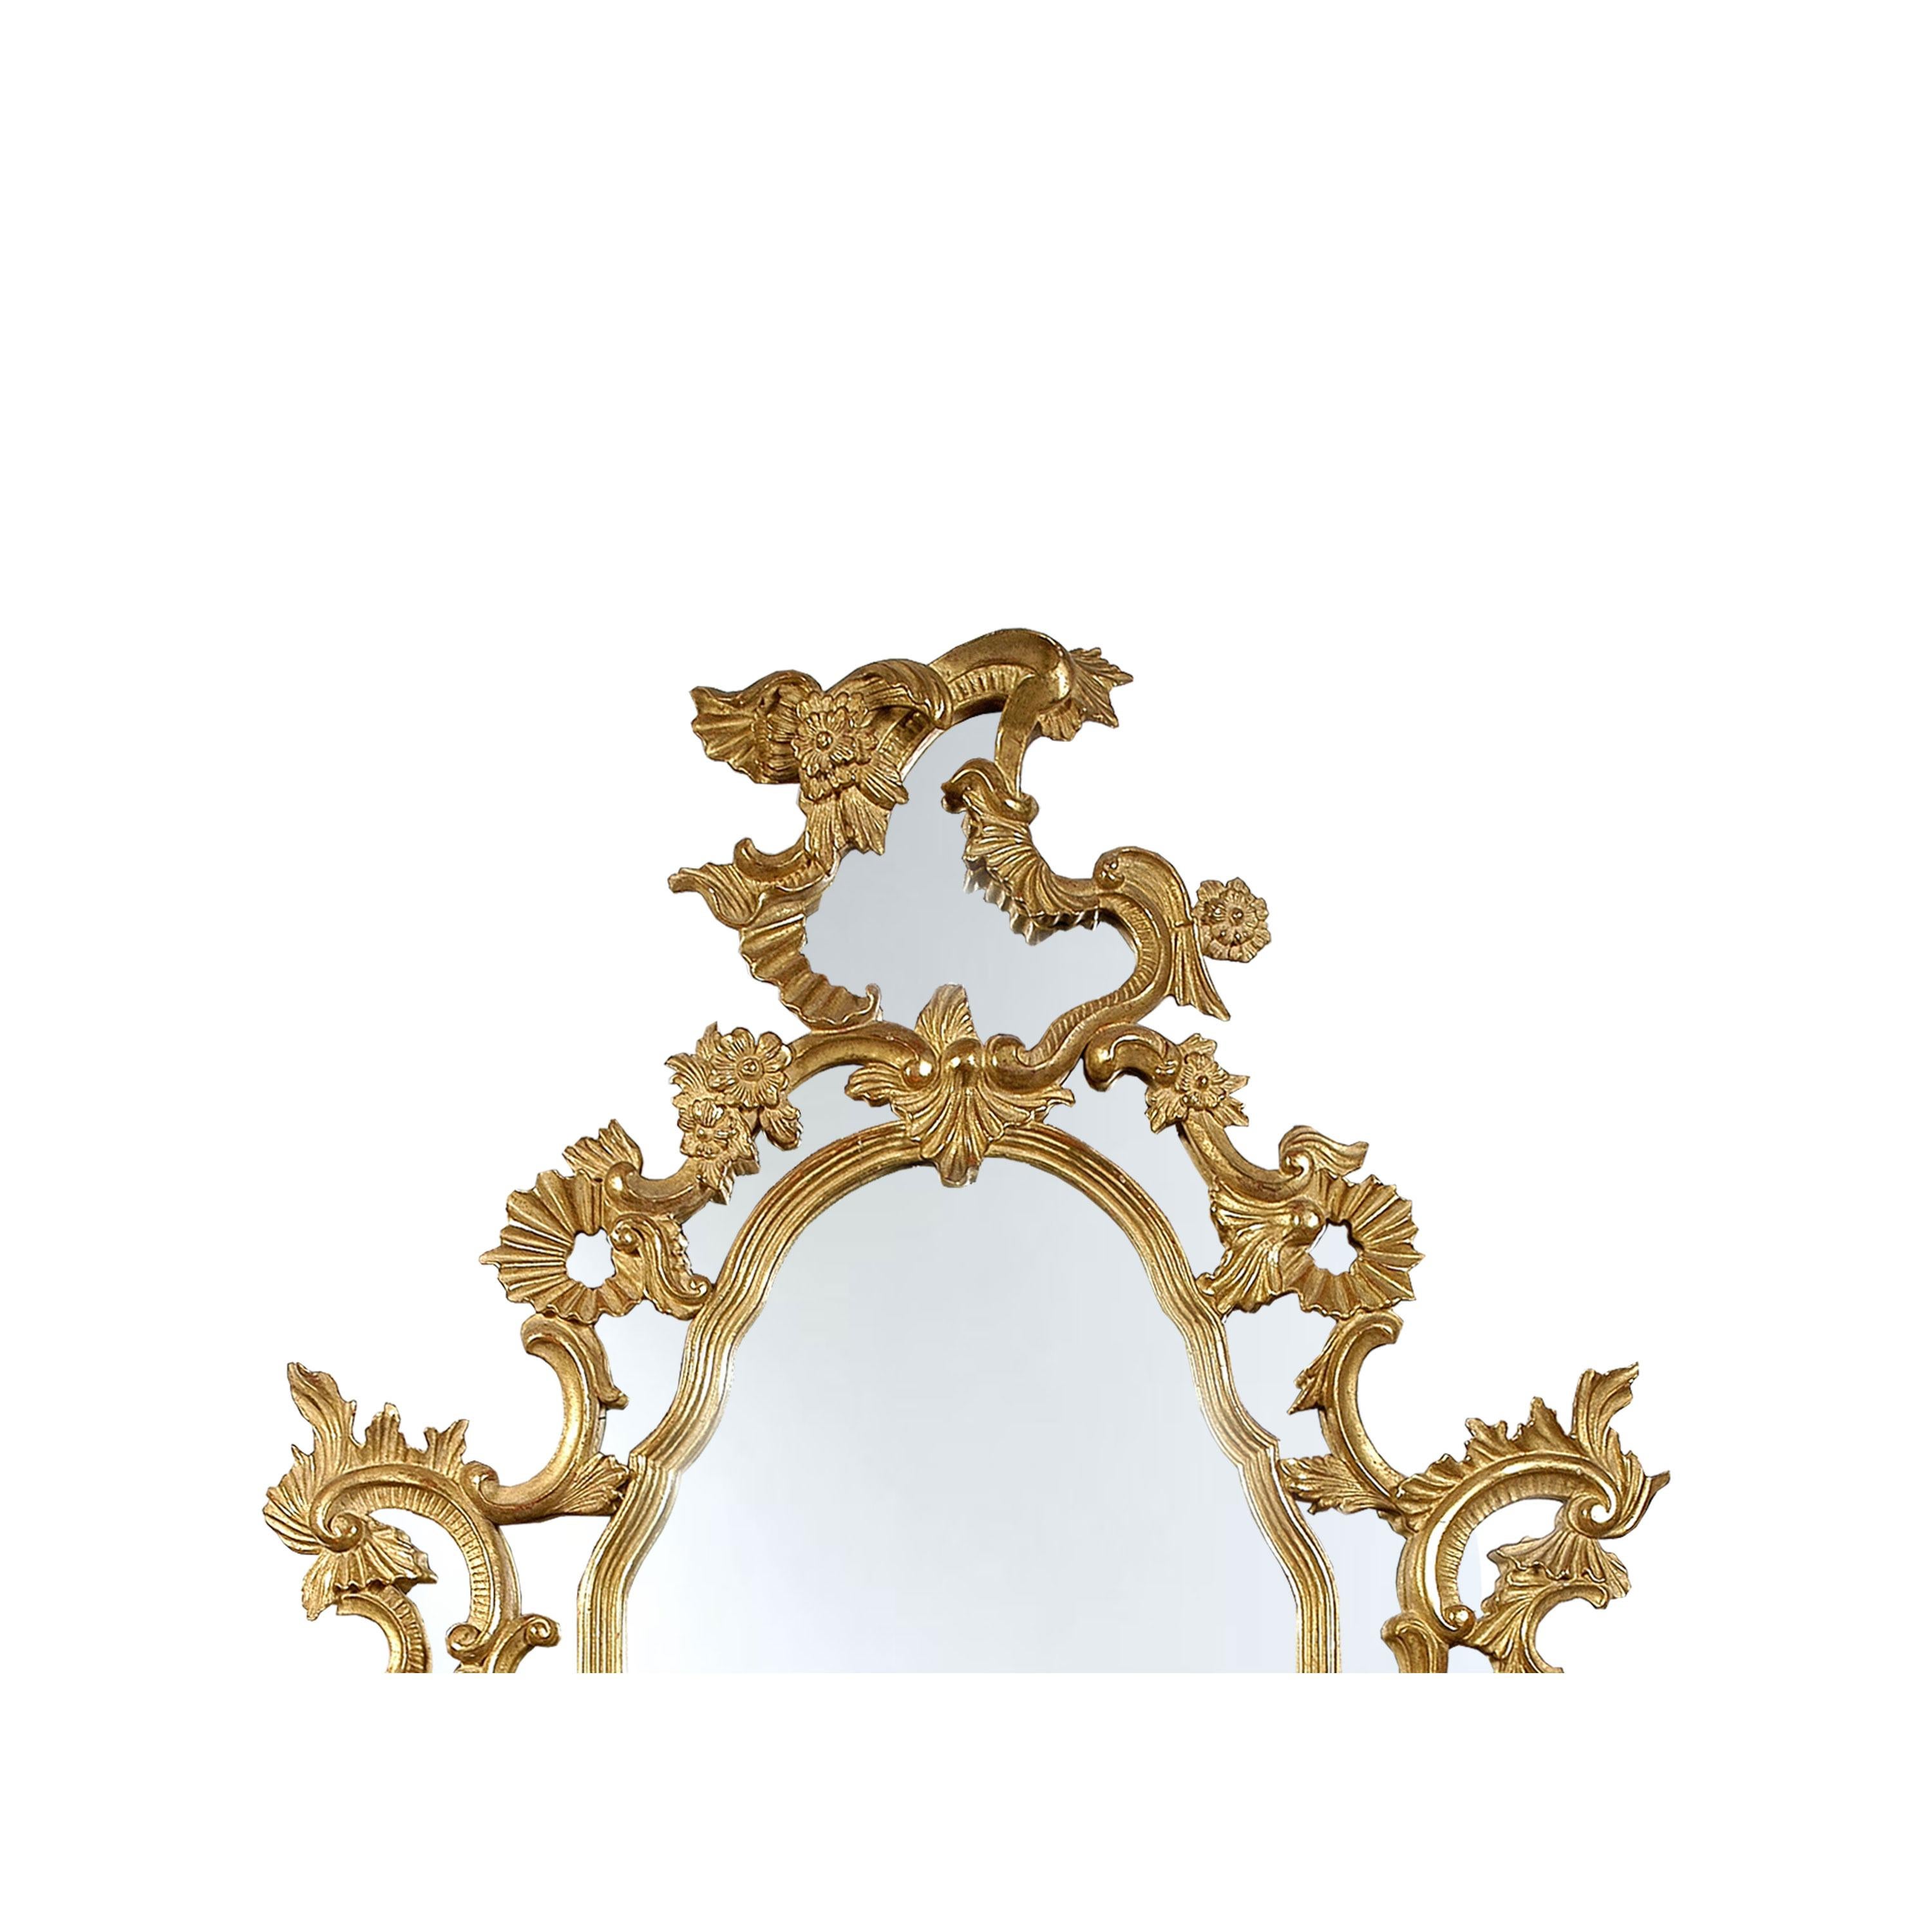 Neoclassical Regency style handcrafted mirror. Rectangular hand carved wooden structure with gold foiled finish. Spain, 1970.